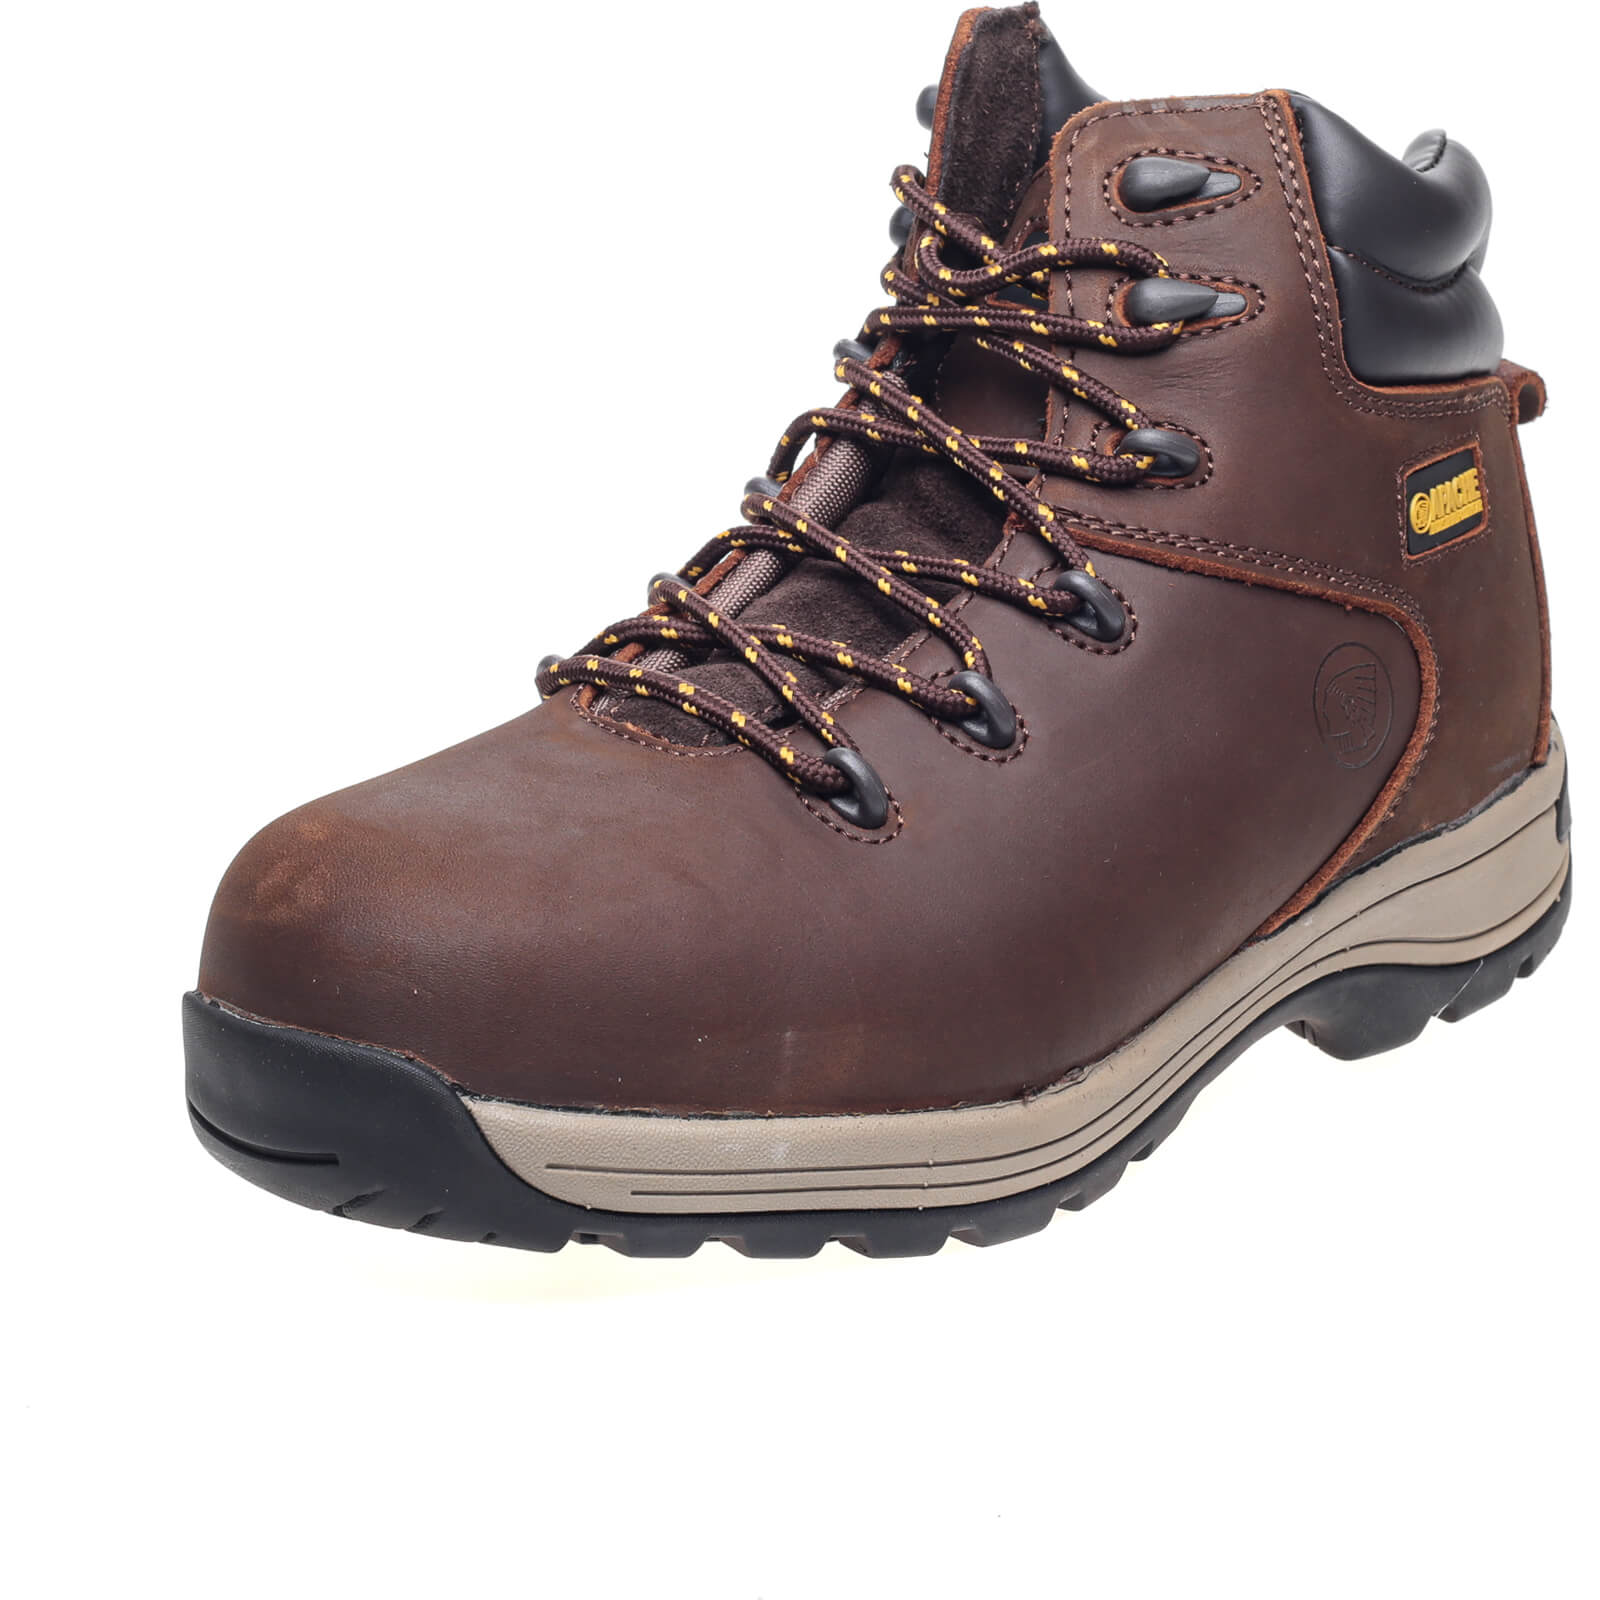 Apache AP31 Nubuck Water Resistant Safety Hiker Boots Brown Size 9